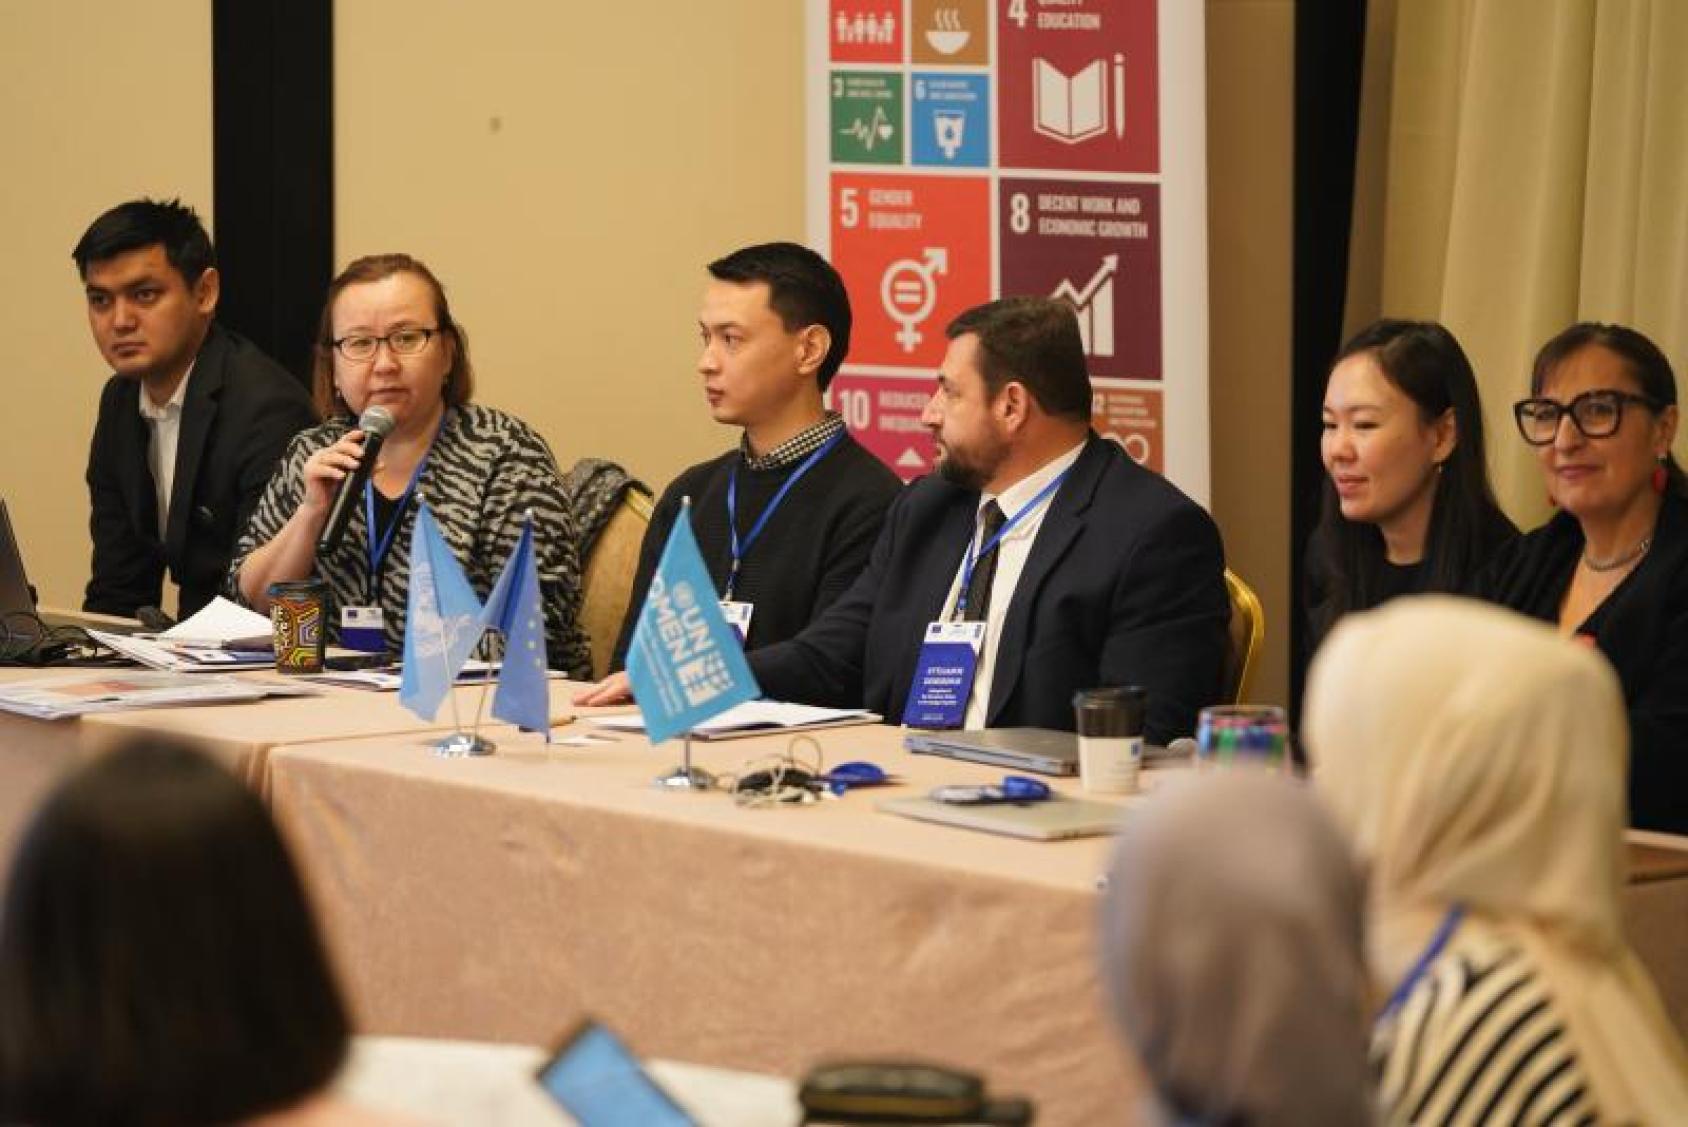 A panel of suited speakers discuss topics, with an SDGs banner behind them and UN Women flags on the table.